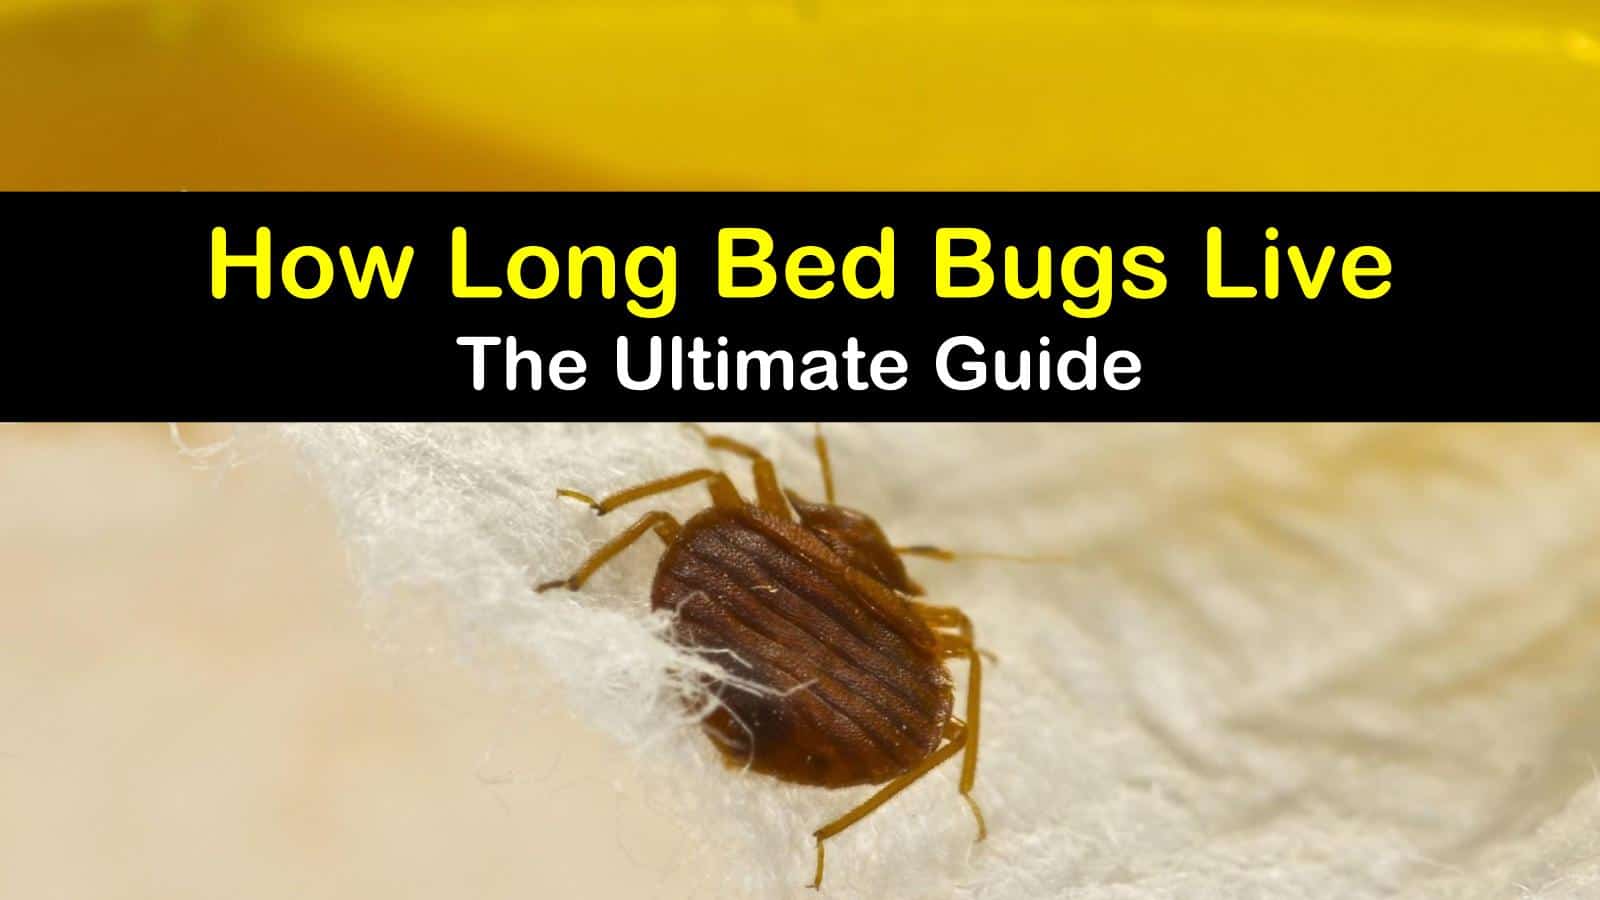 can bed bugs live in an air mattress